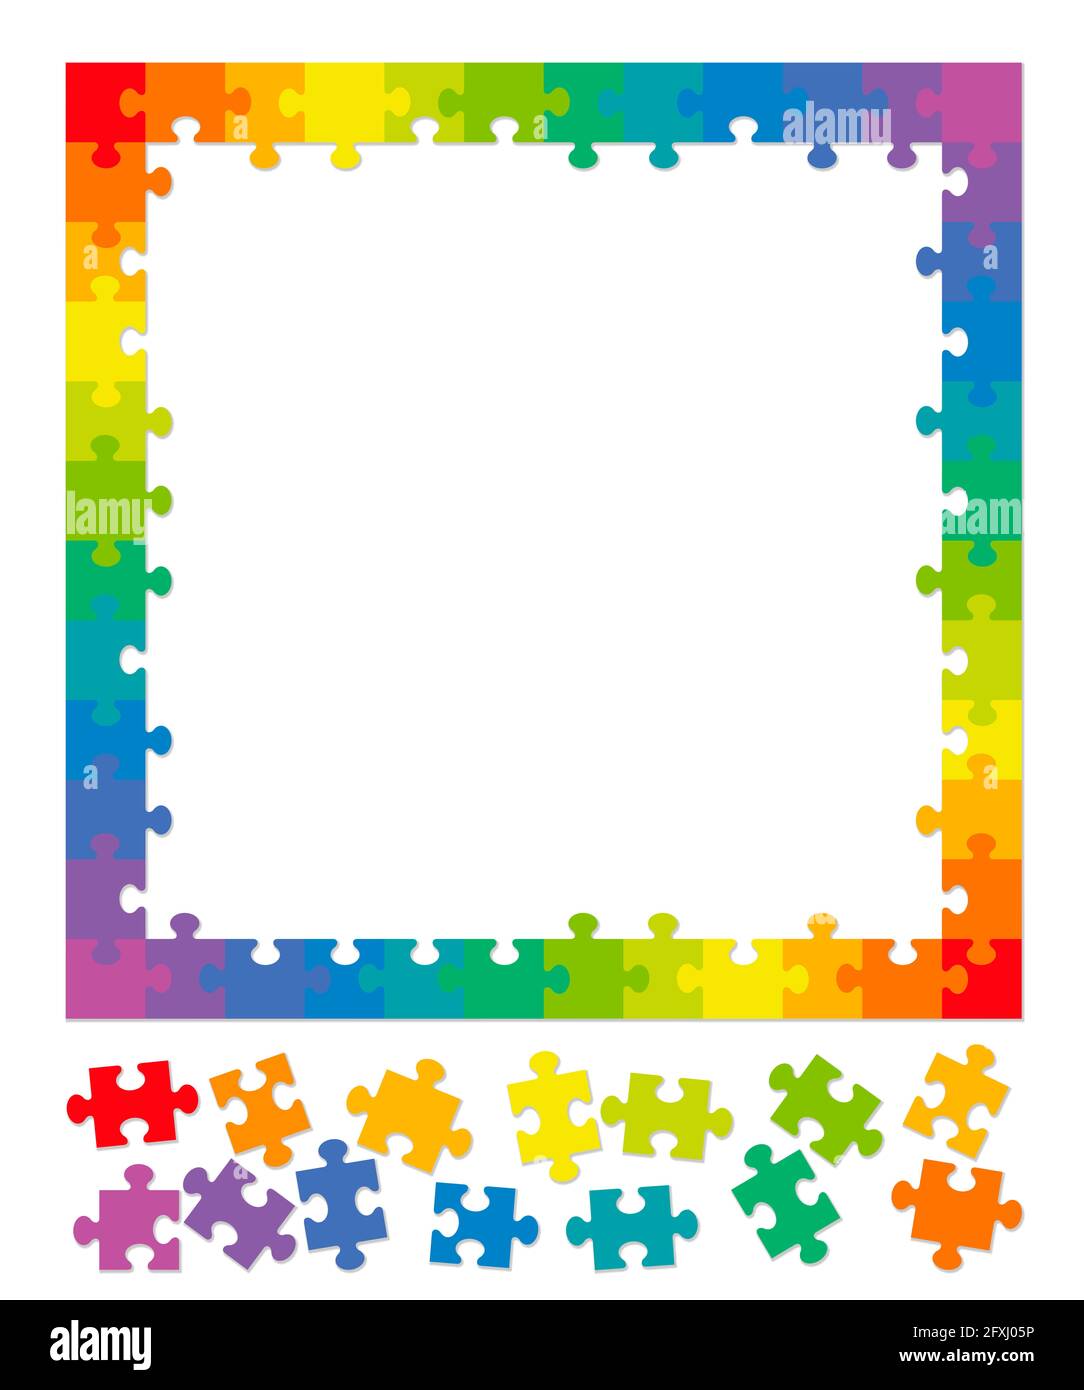 Puzzle frame. Rainbow colored framework, symbol for planning, structuring or shaping ones life, friendship, partnership, a project or any topics. Stock Photo